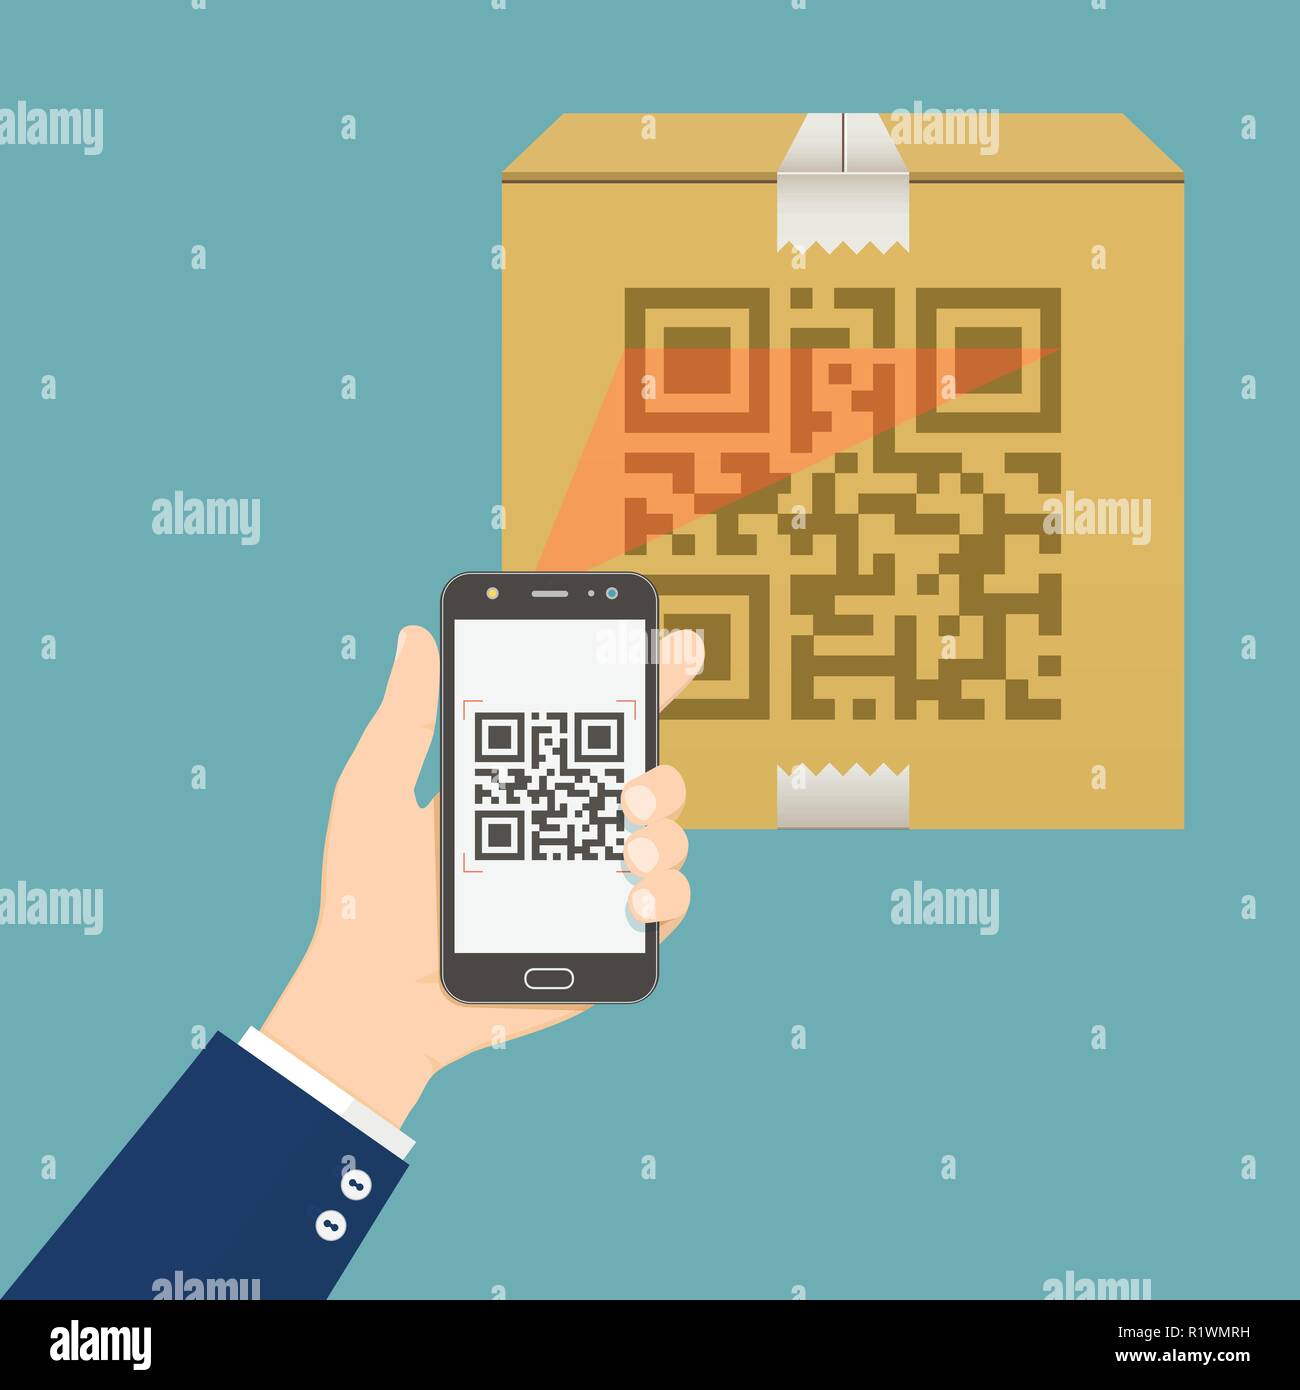 Hand holding mobile phone scanning QR code on cardboard box Stock Vector